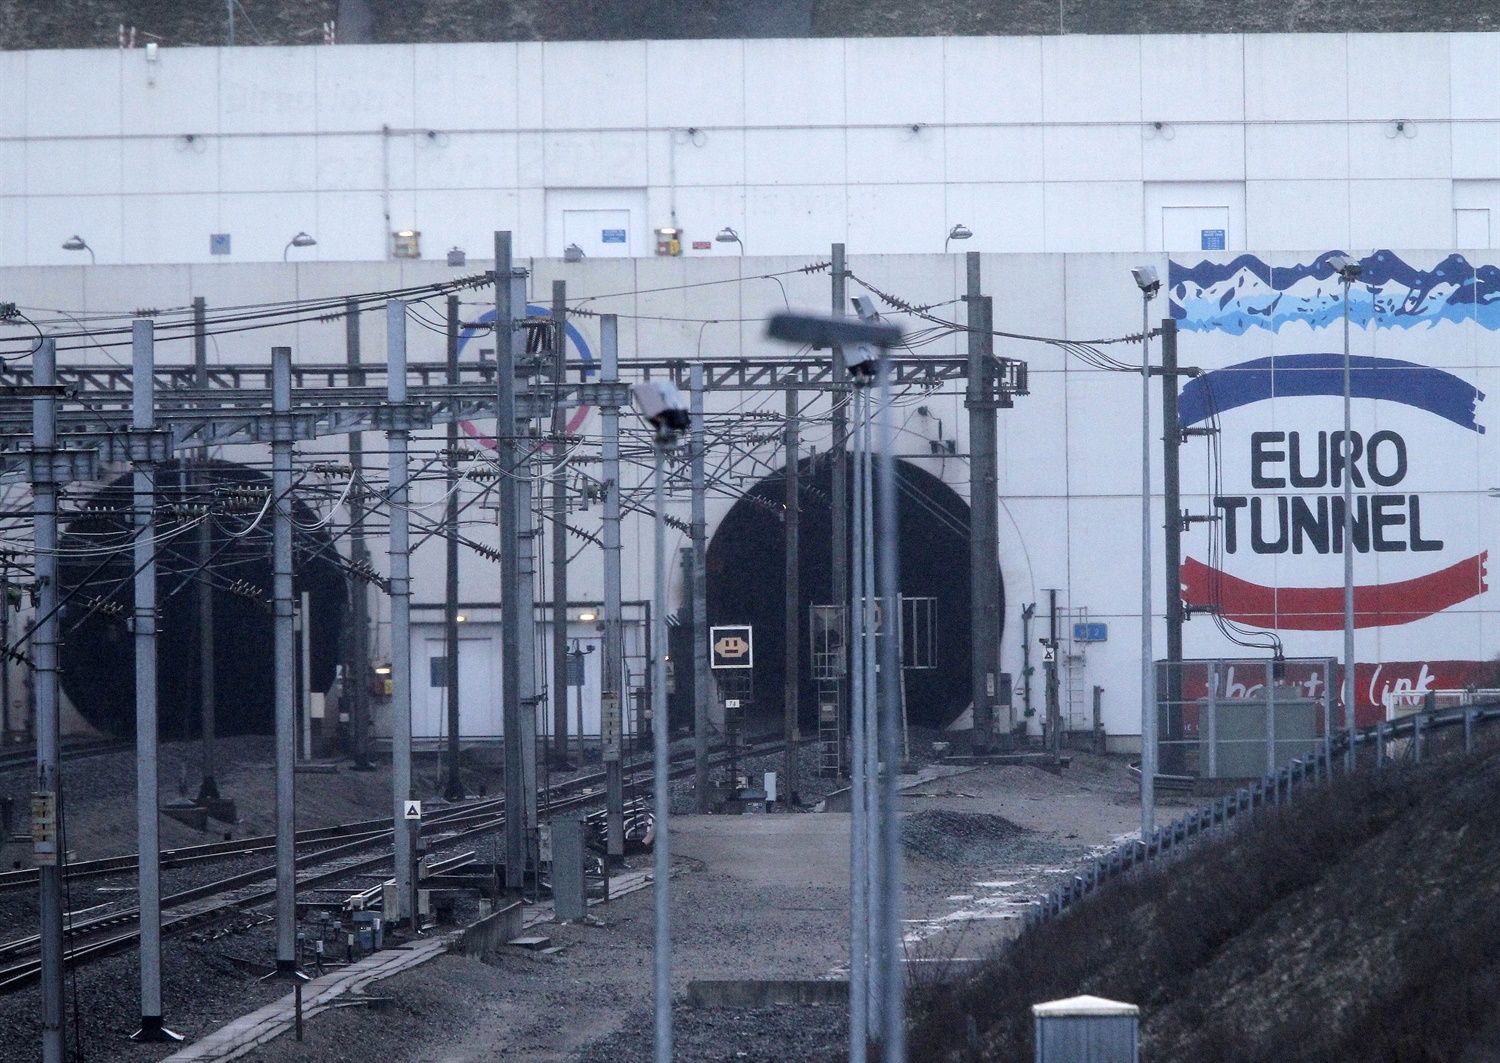 Redesign calls for Channel Tunnel’s open shuttle trains after latest fire